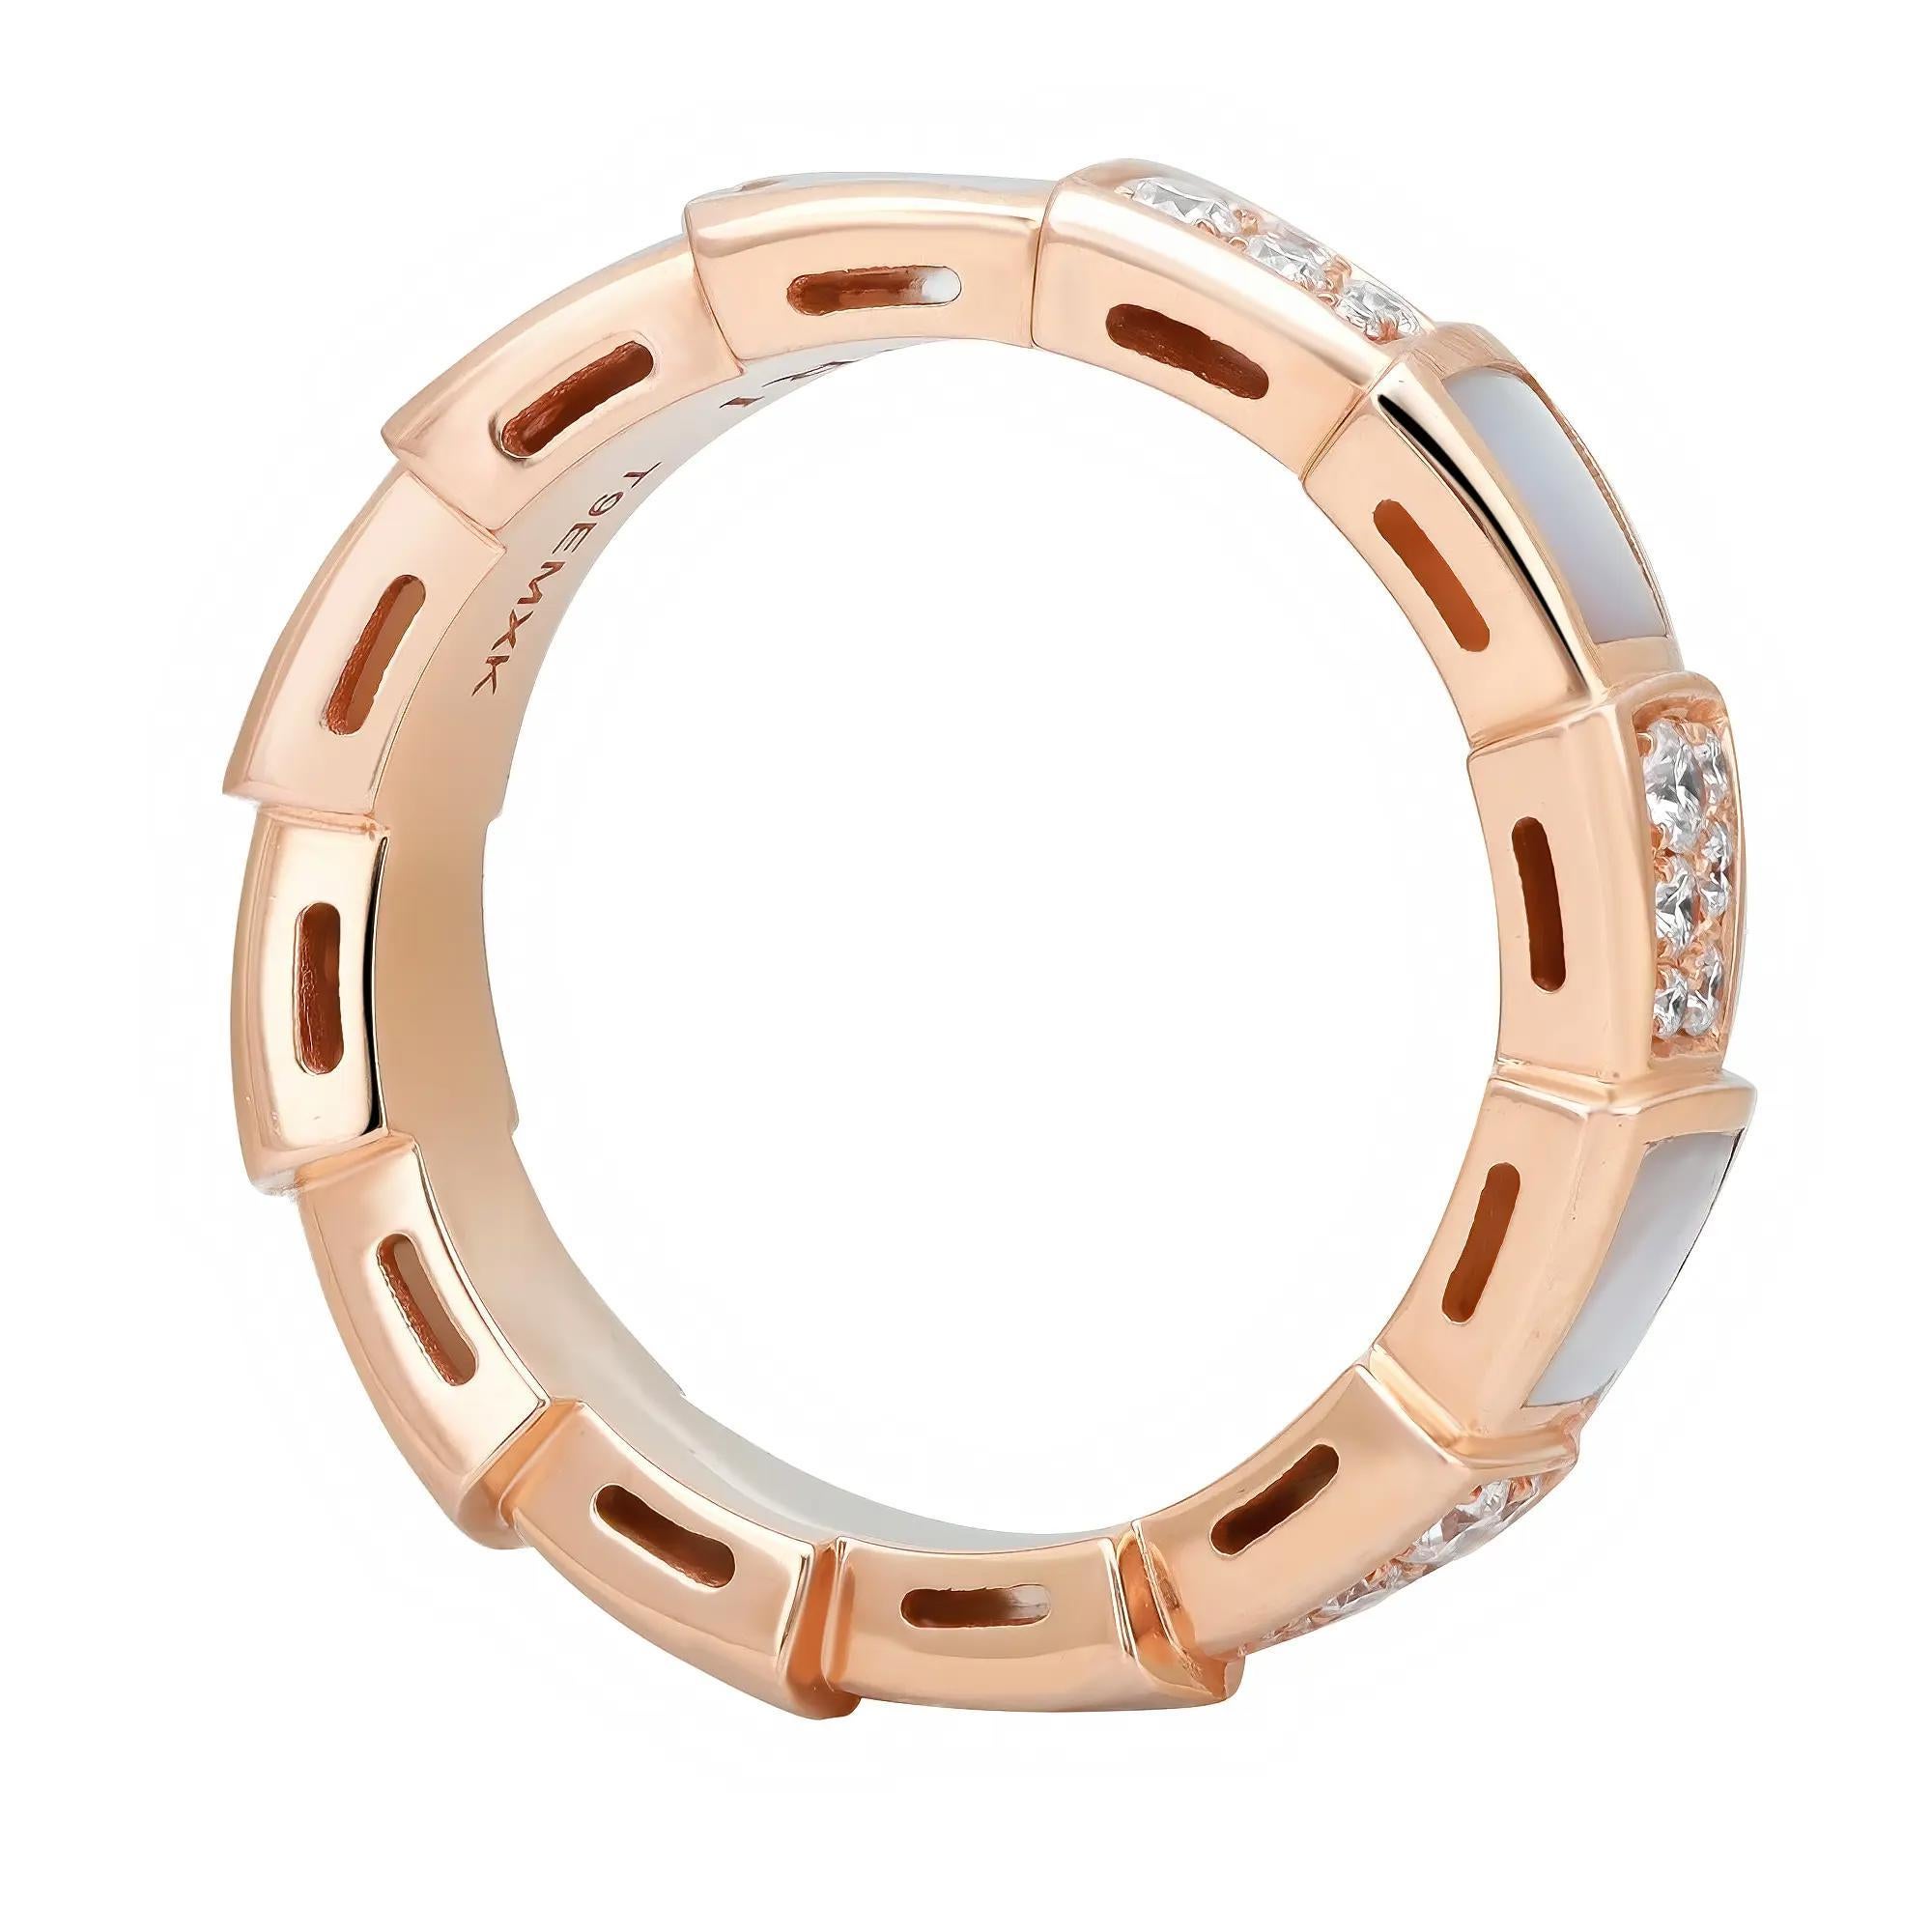 Bvlgari Serpenti Viper Diamond & Mother Of Pearl Band Ring 18K Rose Gold SZ 53  In New Condition For Sale In New York, NY